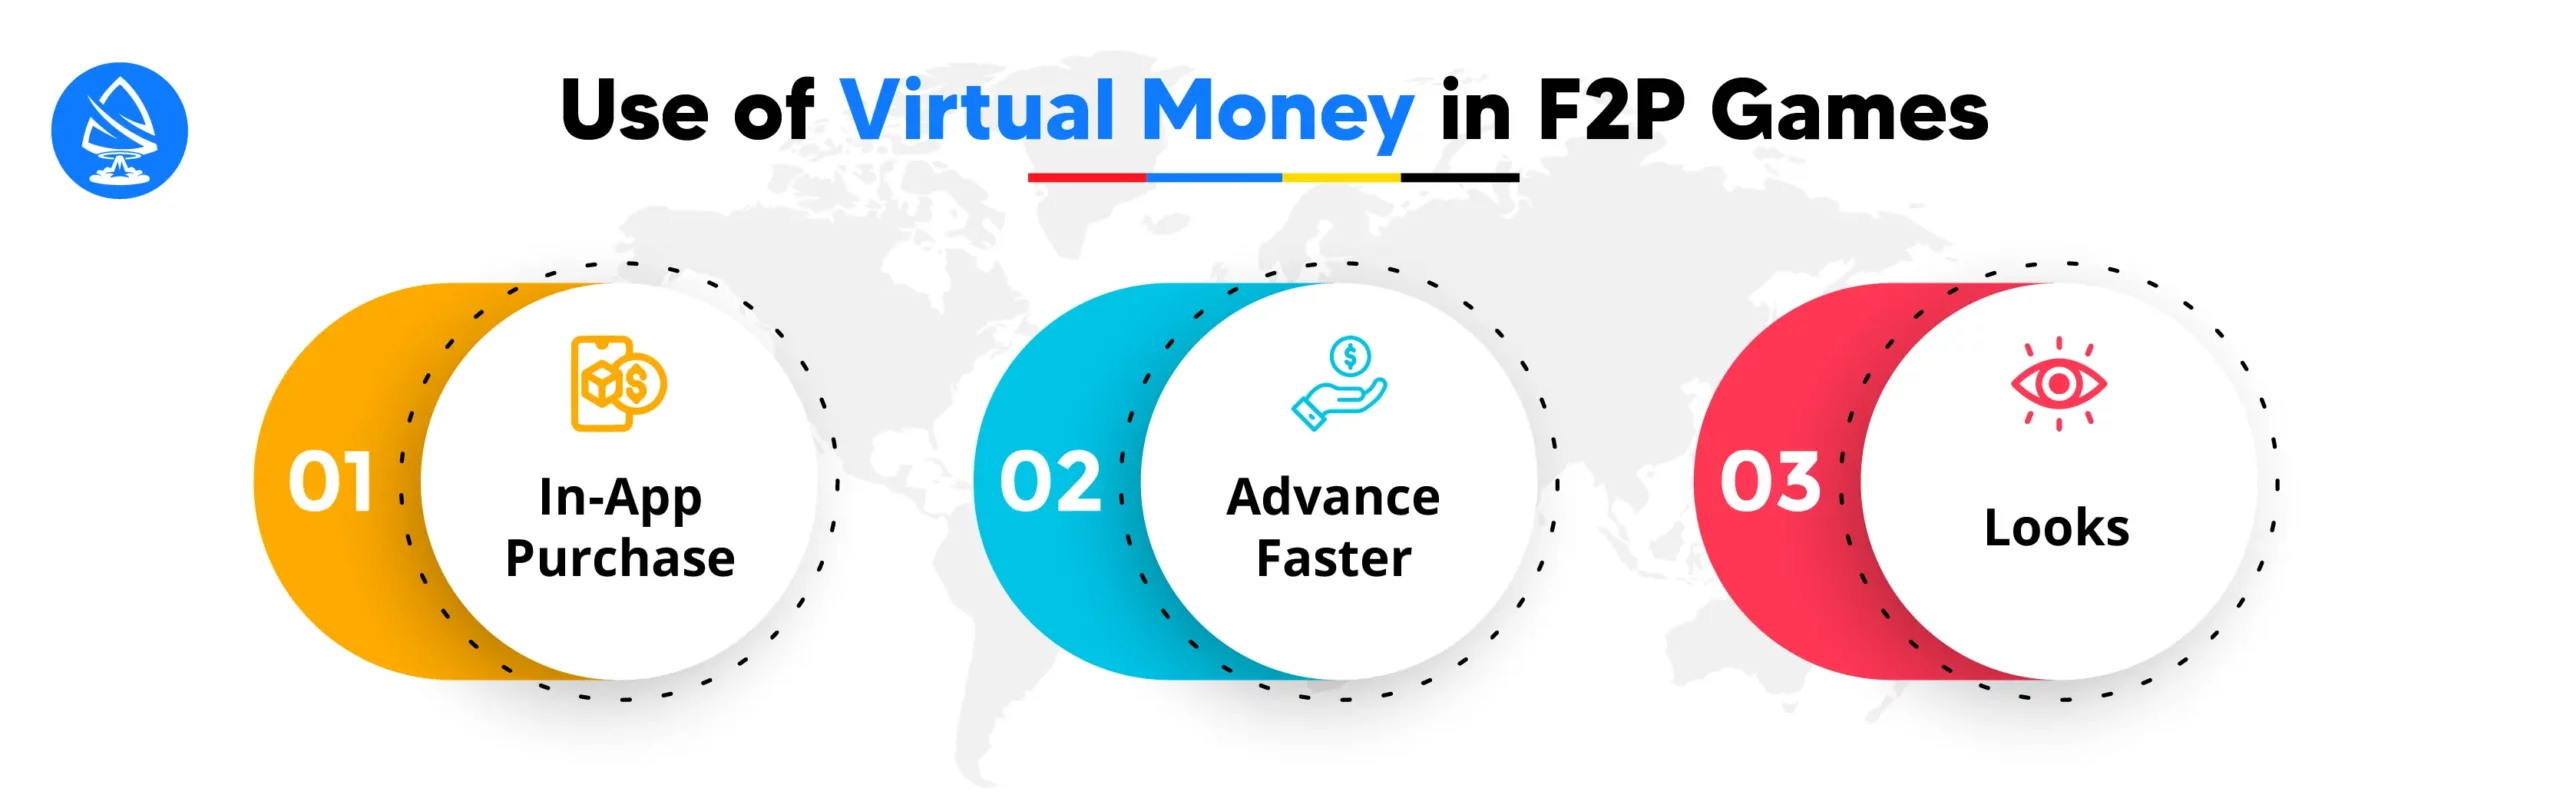 Use of Virtual Money in F2P Games